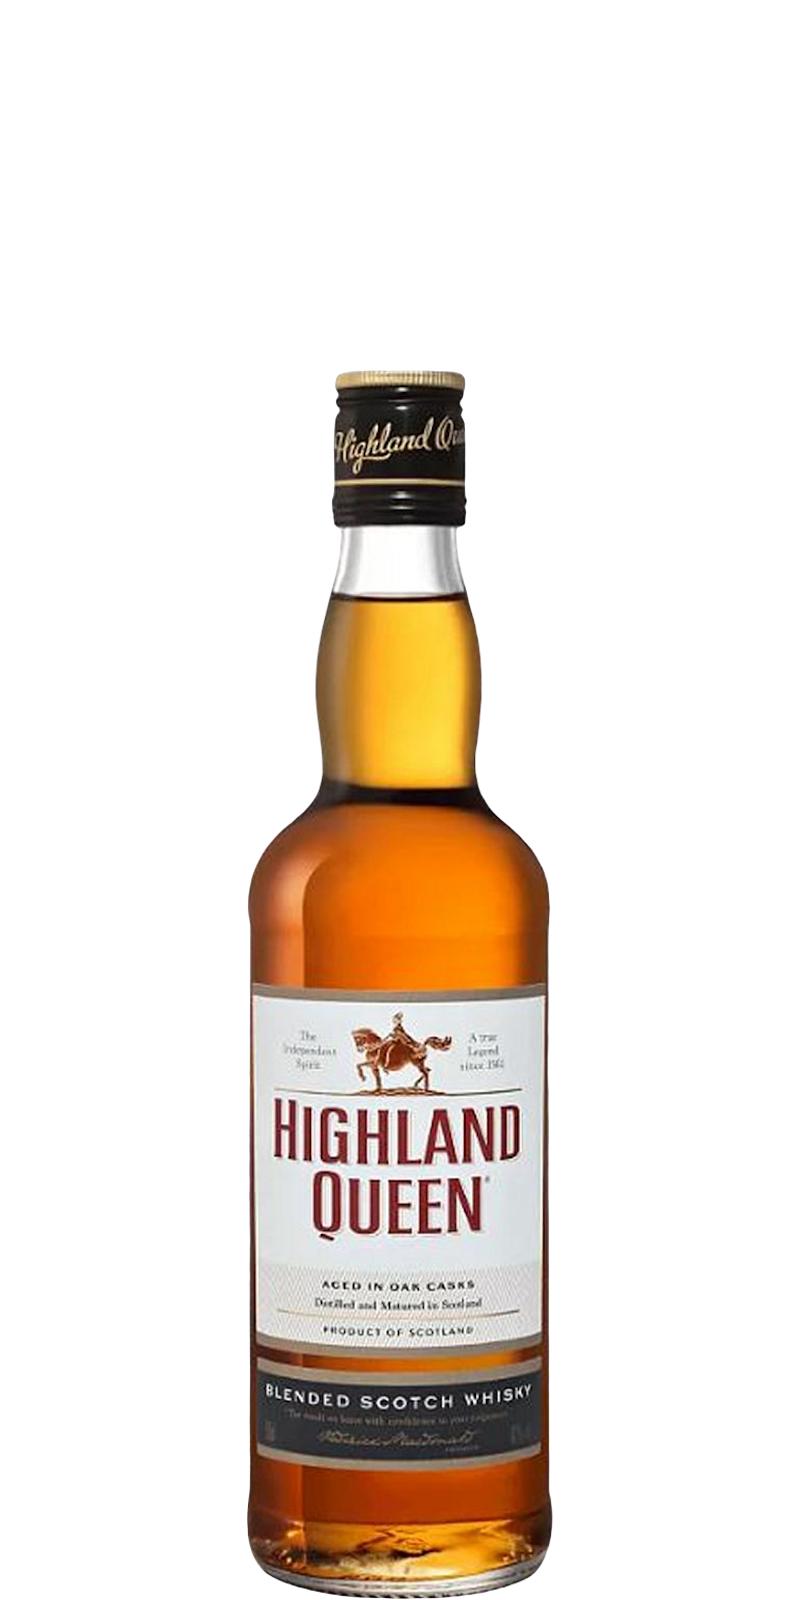 Highland Queen Blended Scotch Whisky HQSW - Ratings and reviews 